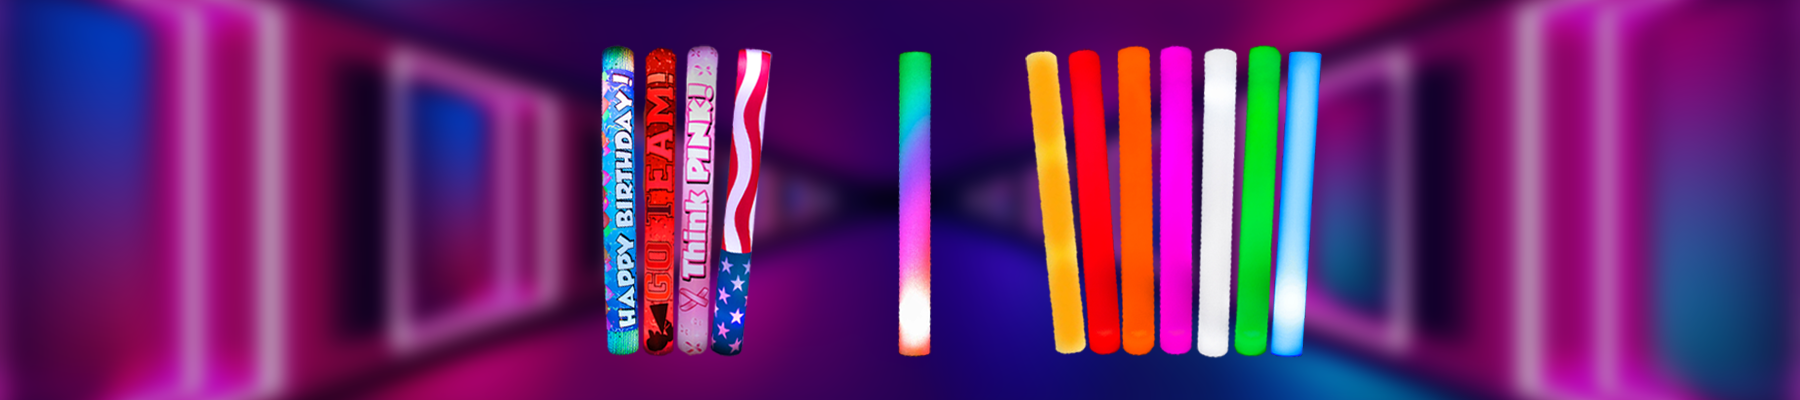 LED Foam Batons - Sizes, Colors, Prints And More!